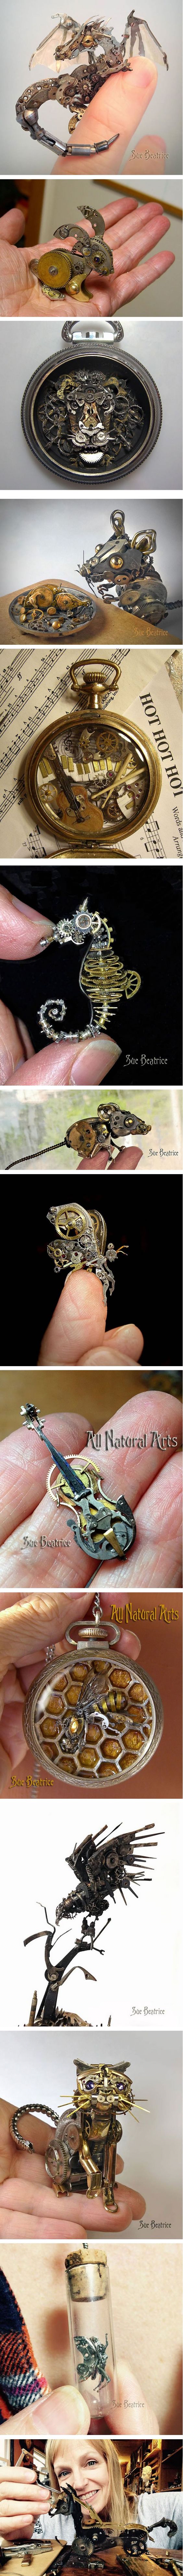 This Artist Recycles Old Watch Parts Into Steampunk Sculptures (By Susan Beatrice)